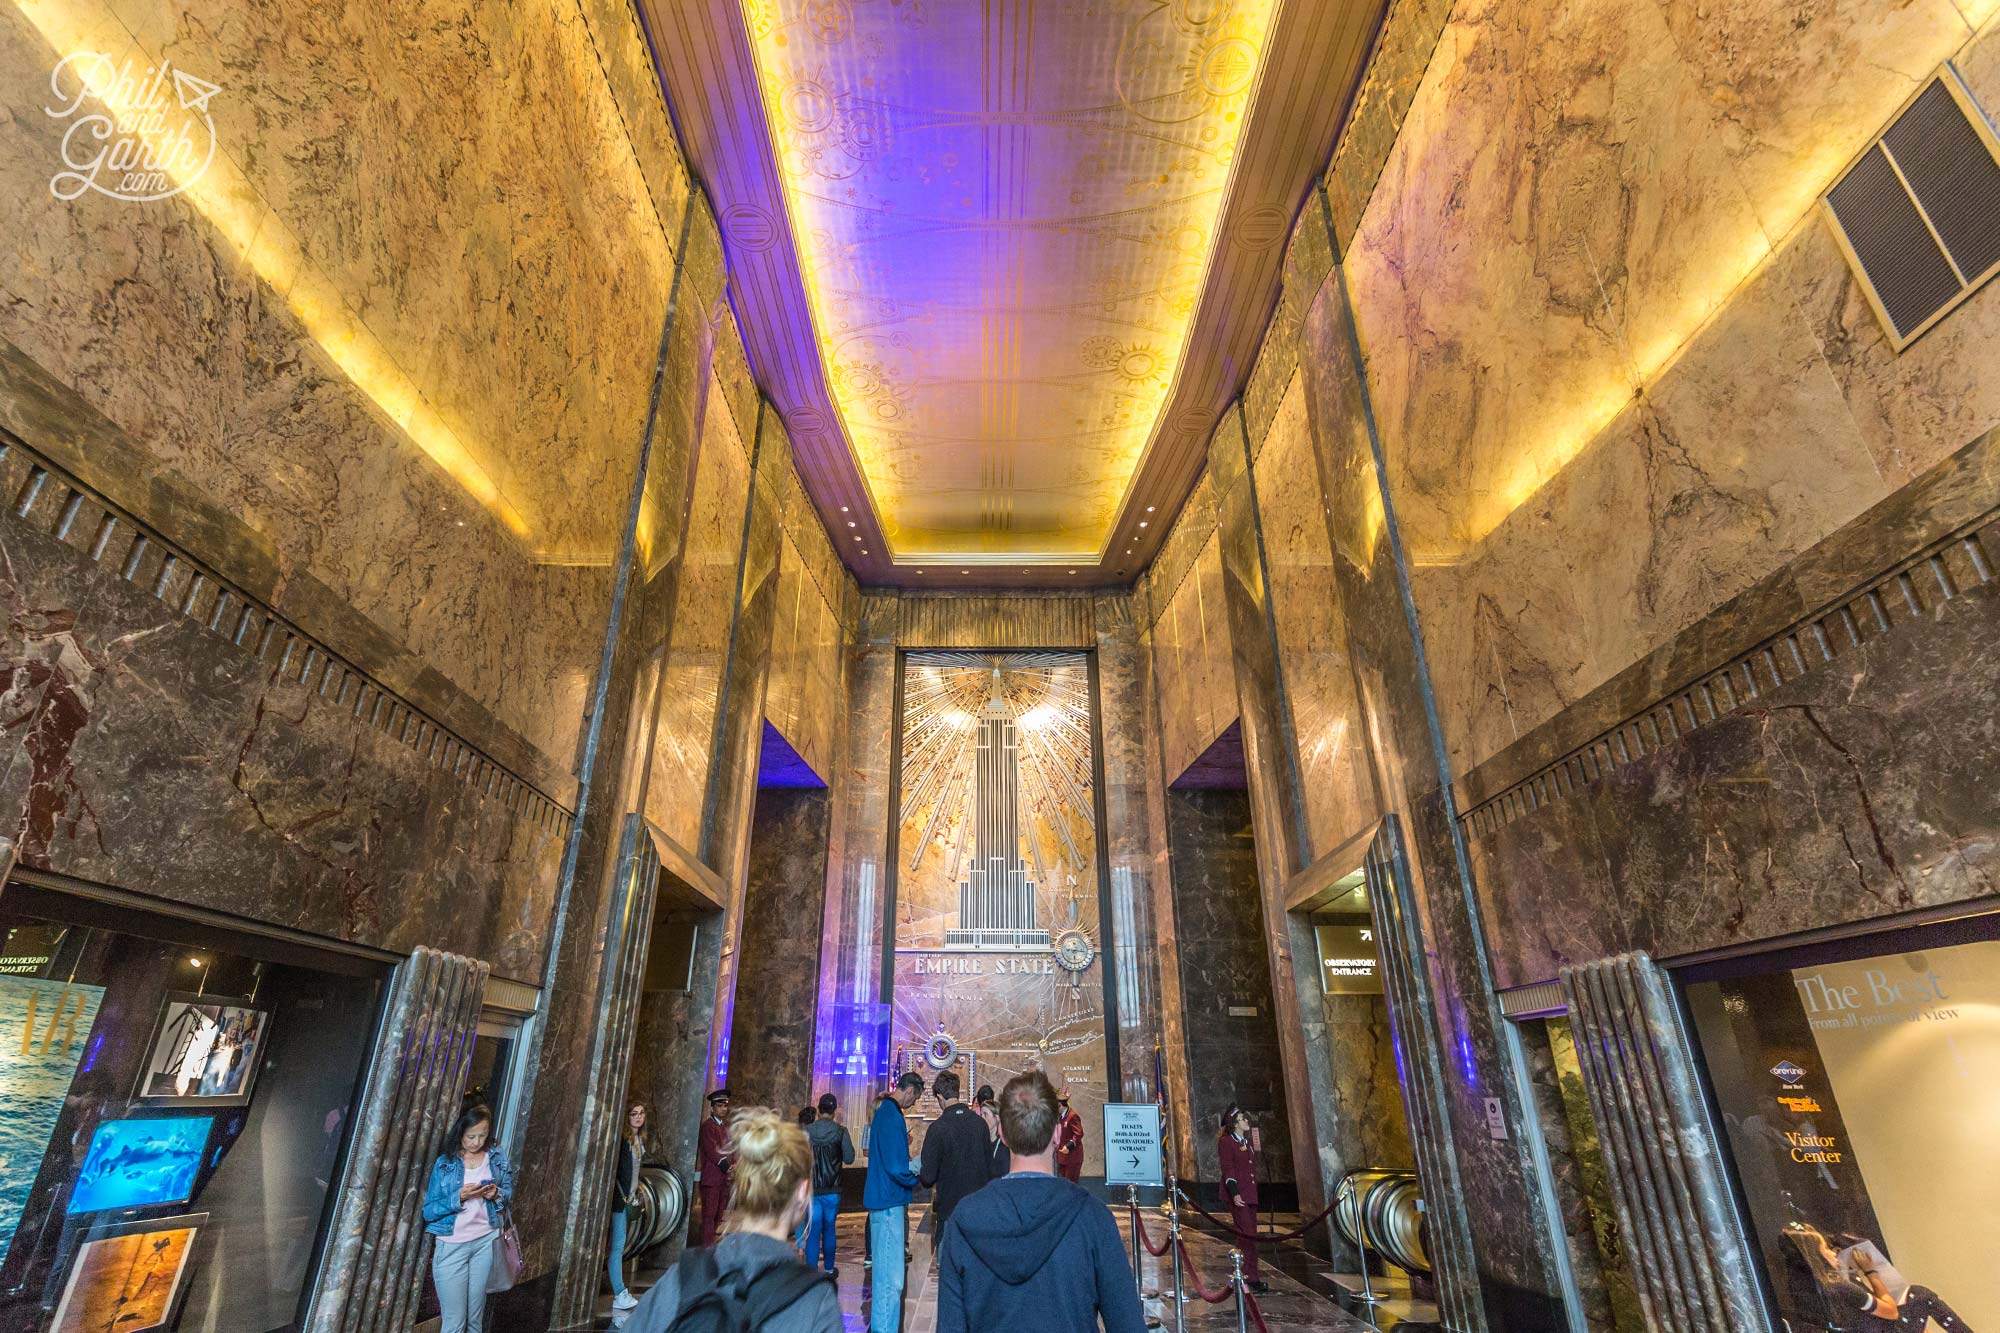 Inside the lobby of the Empire State building